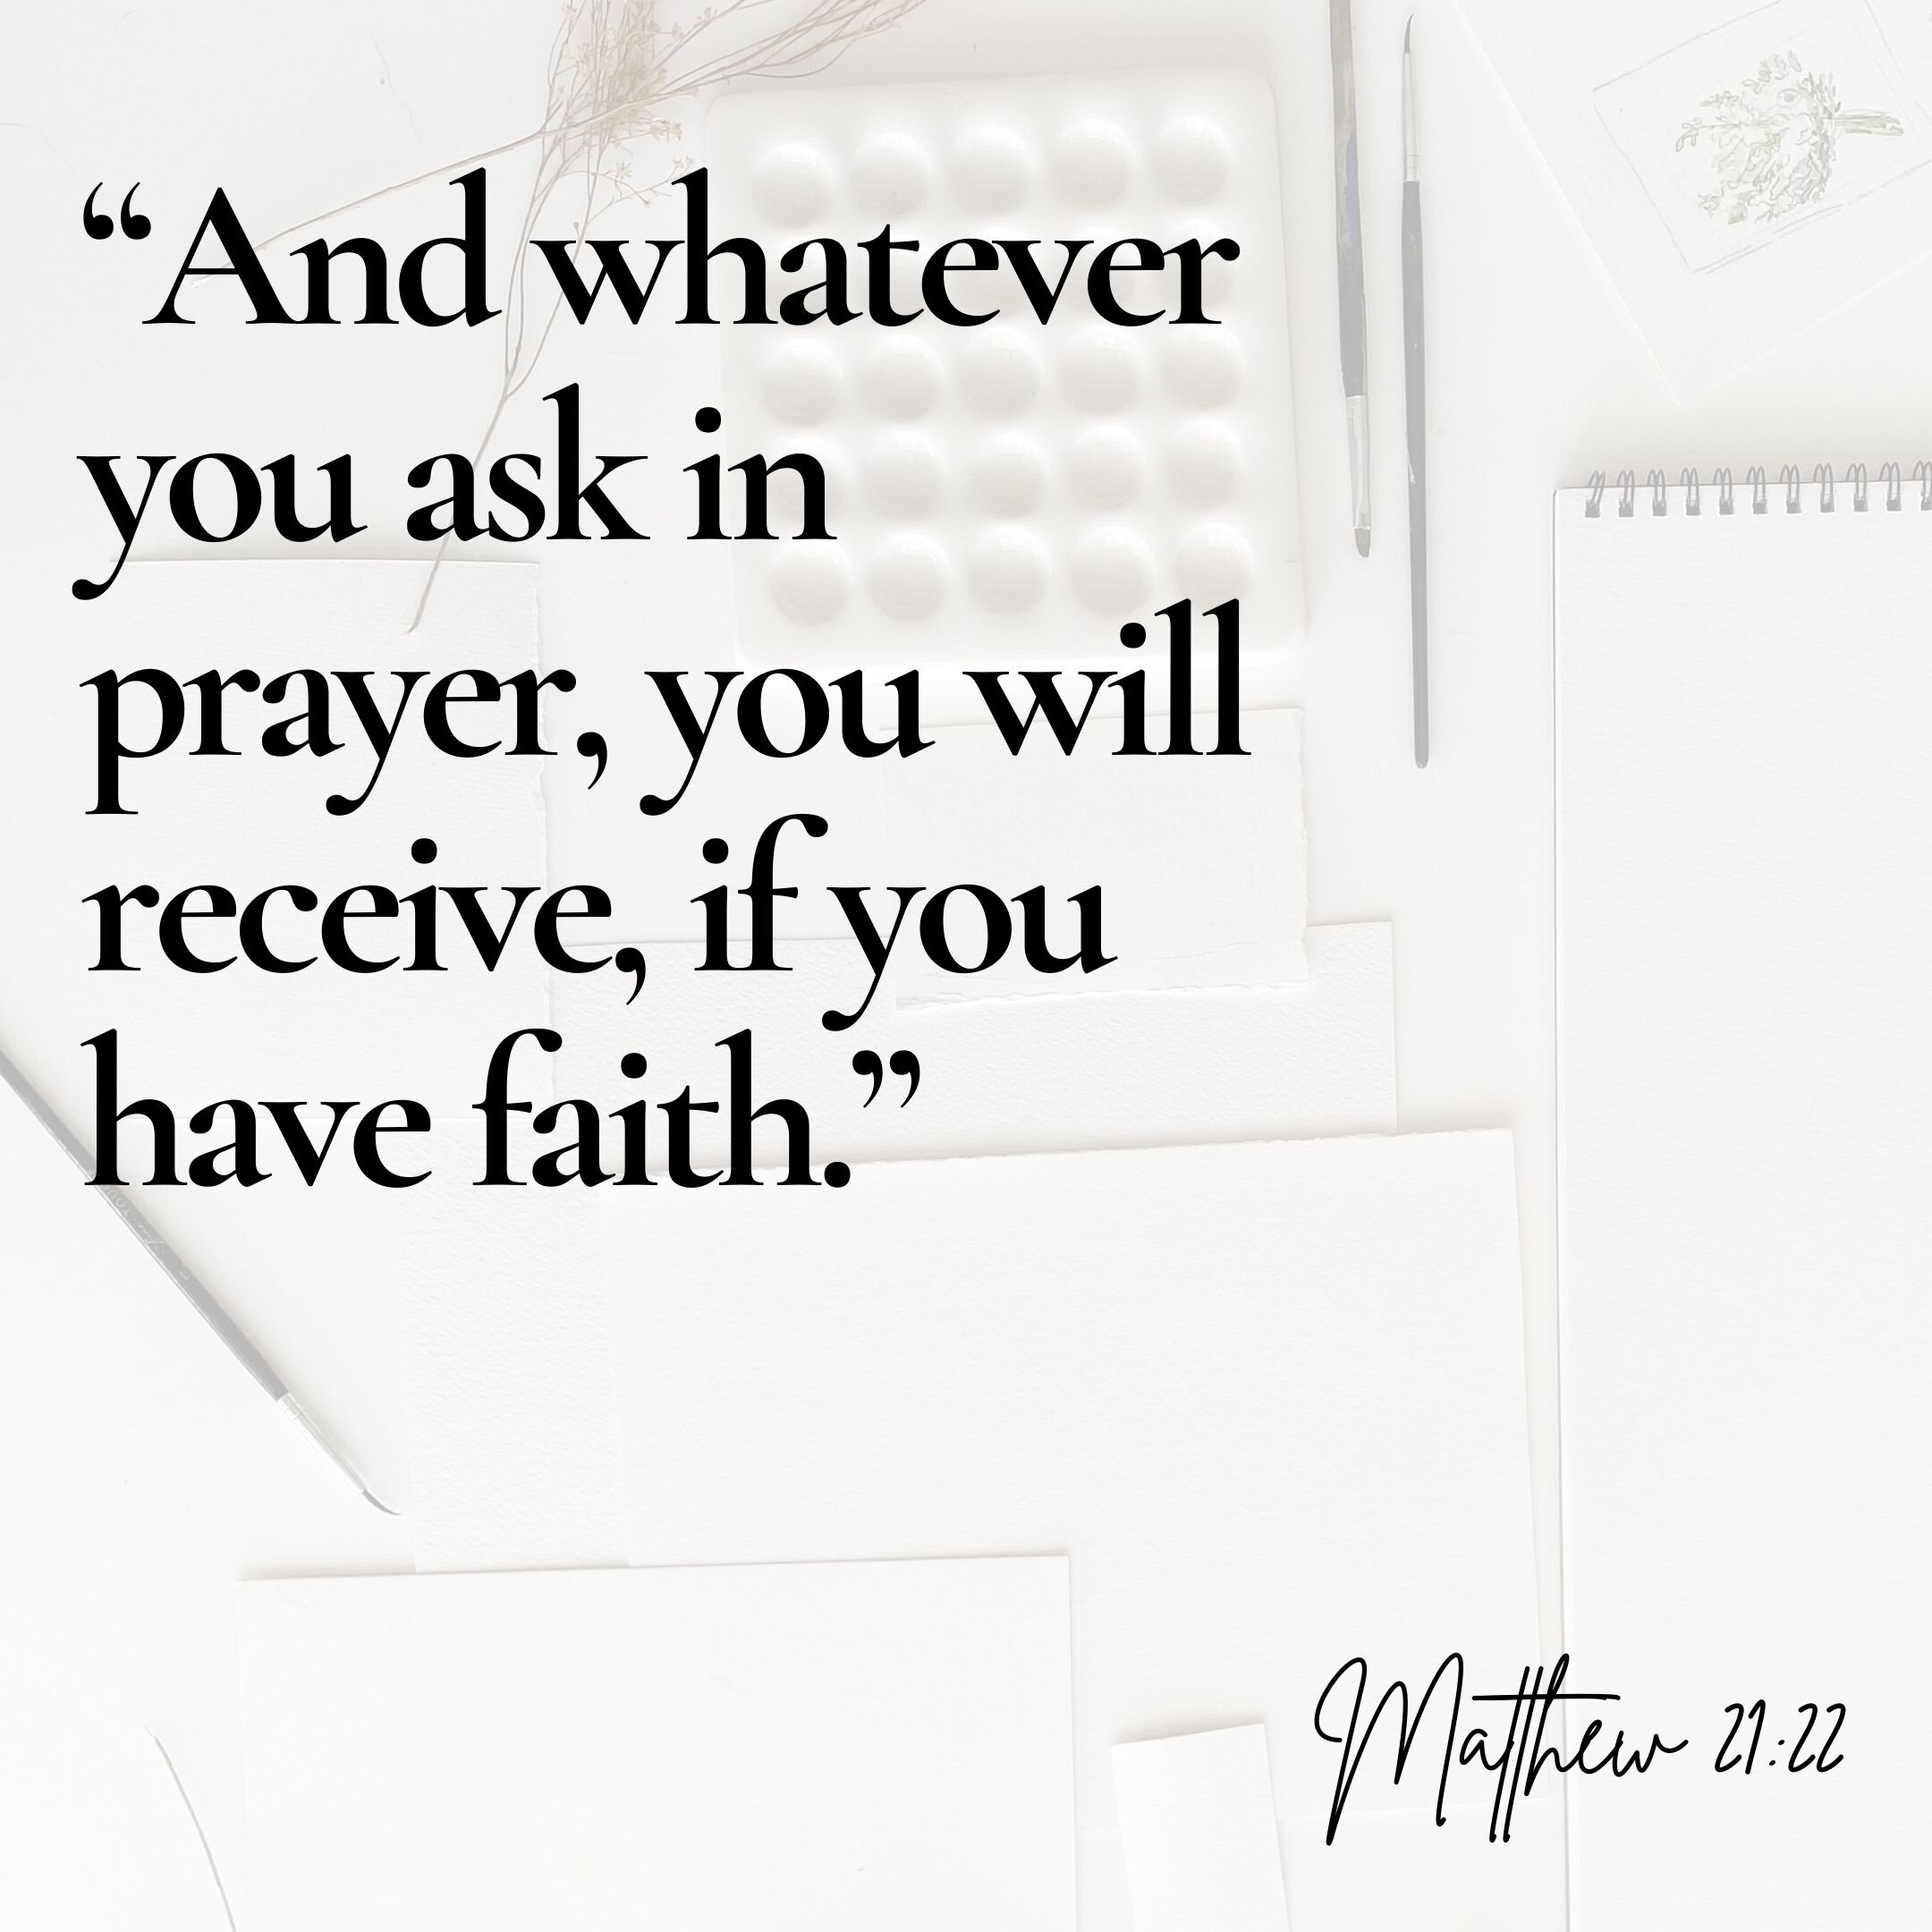 whateveryouask in prayer you will receive.jpg